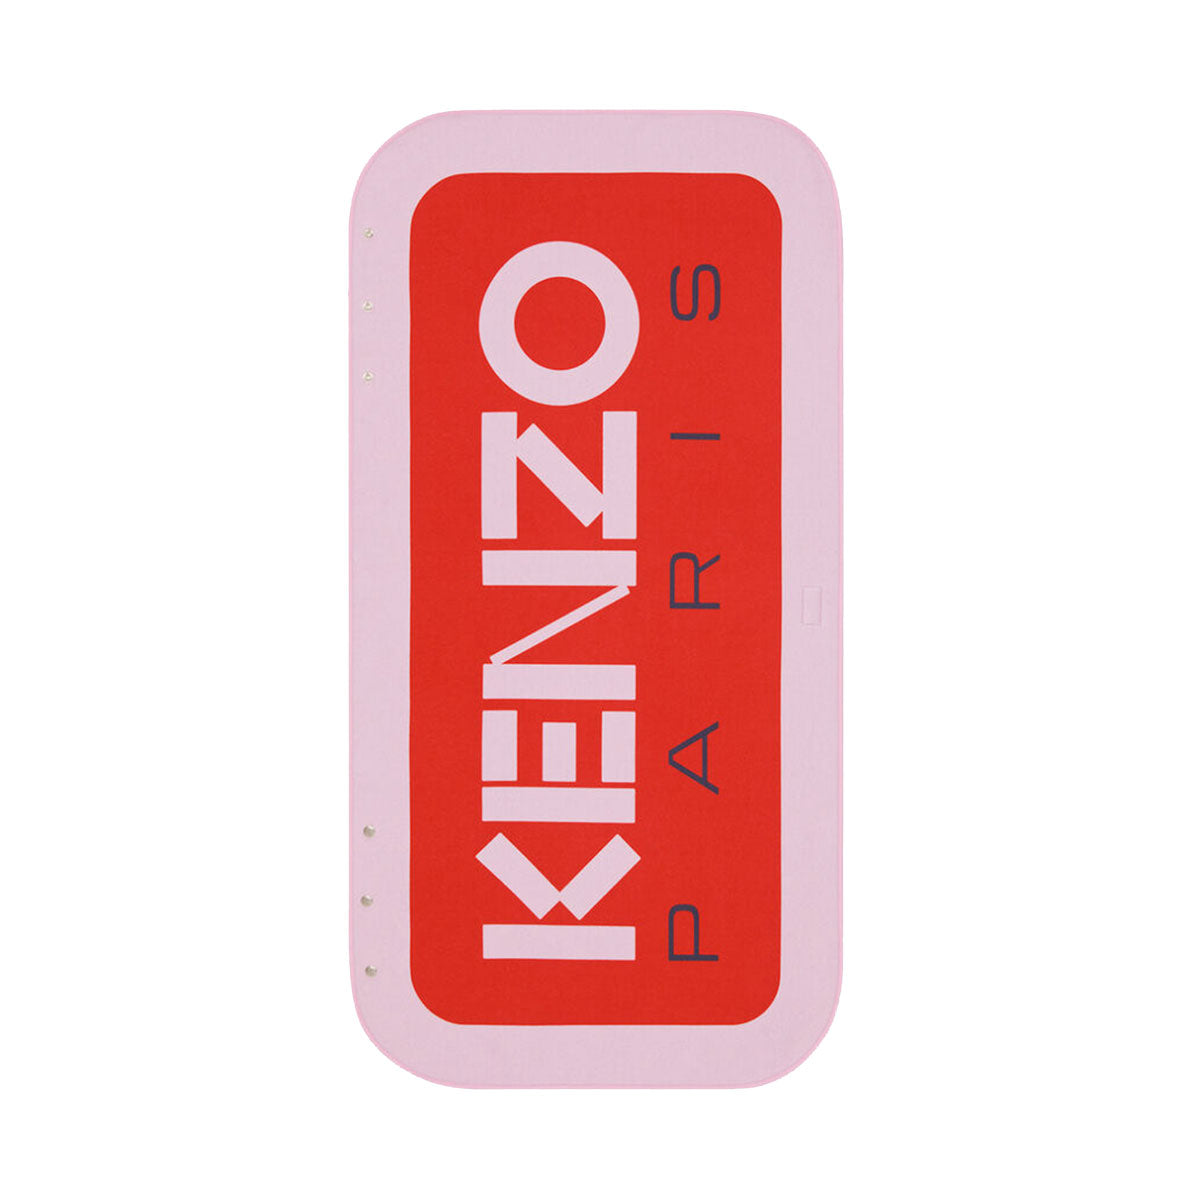 KENZO PARIS ブランケット – Why are you here?